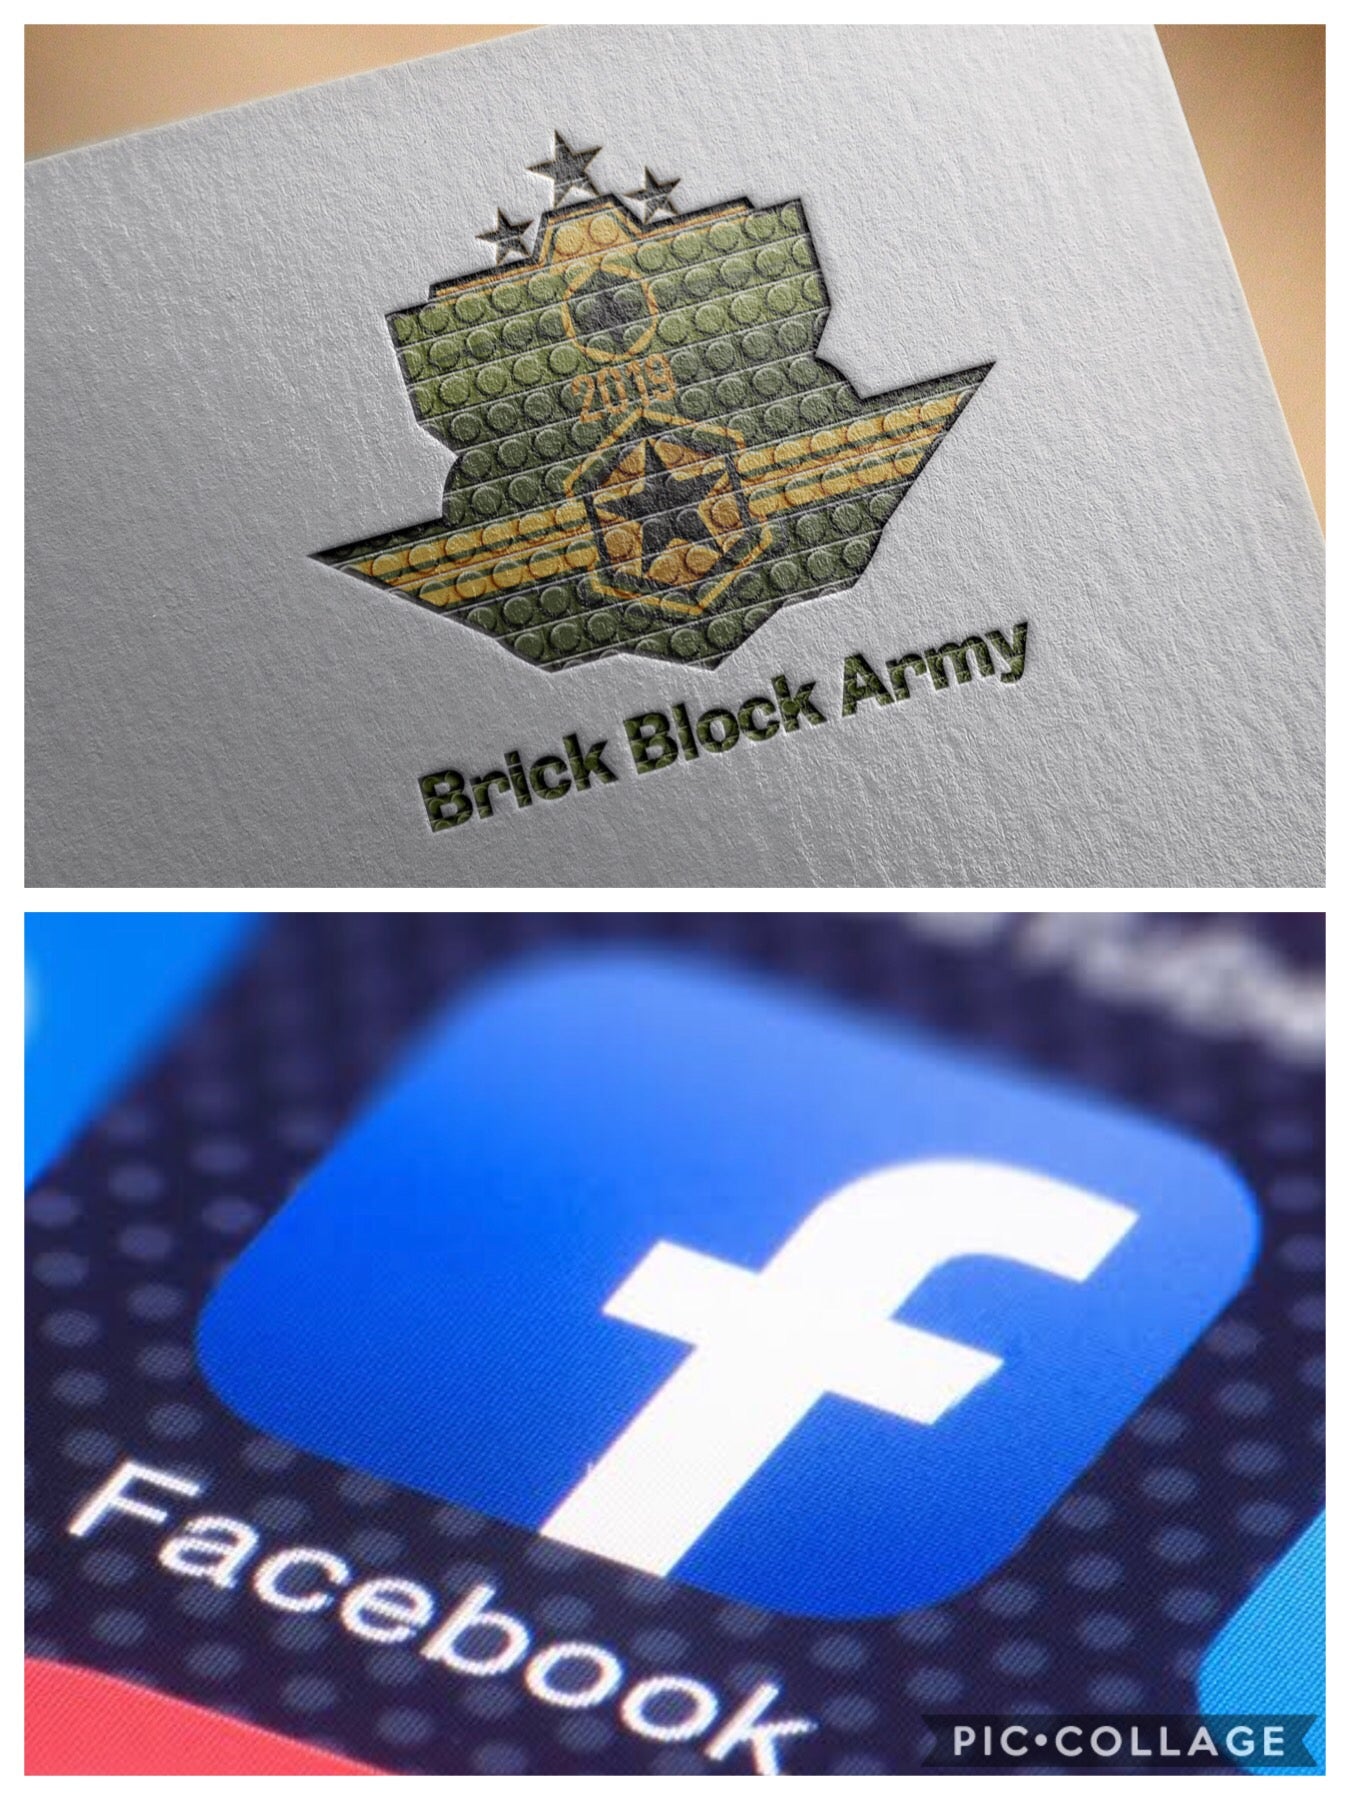 Brick Block Army is live on Facebook